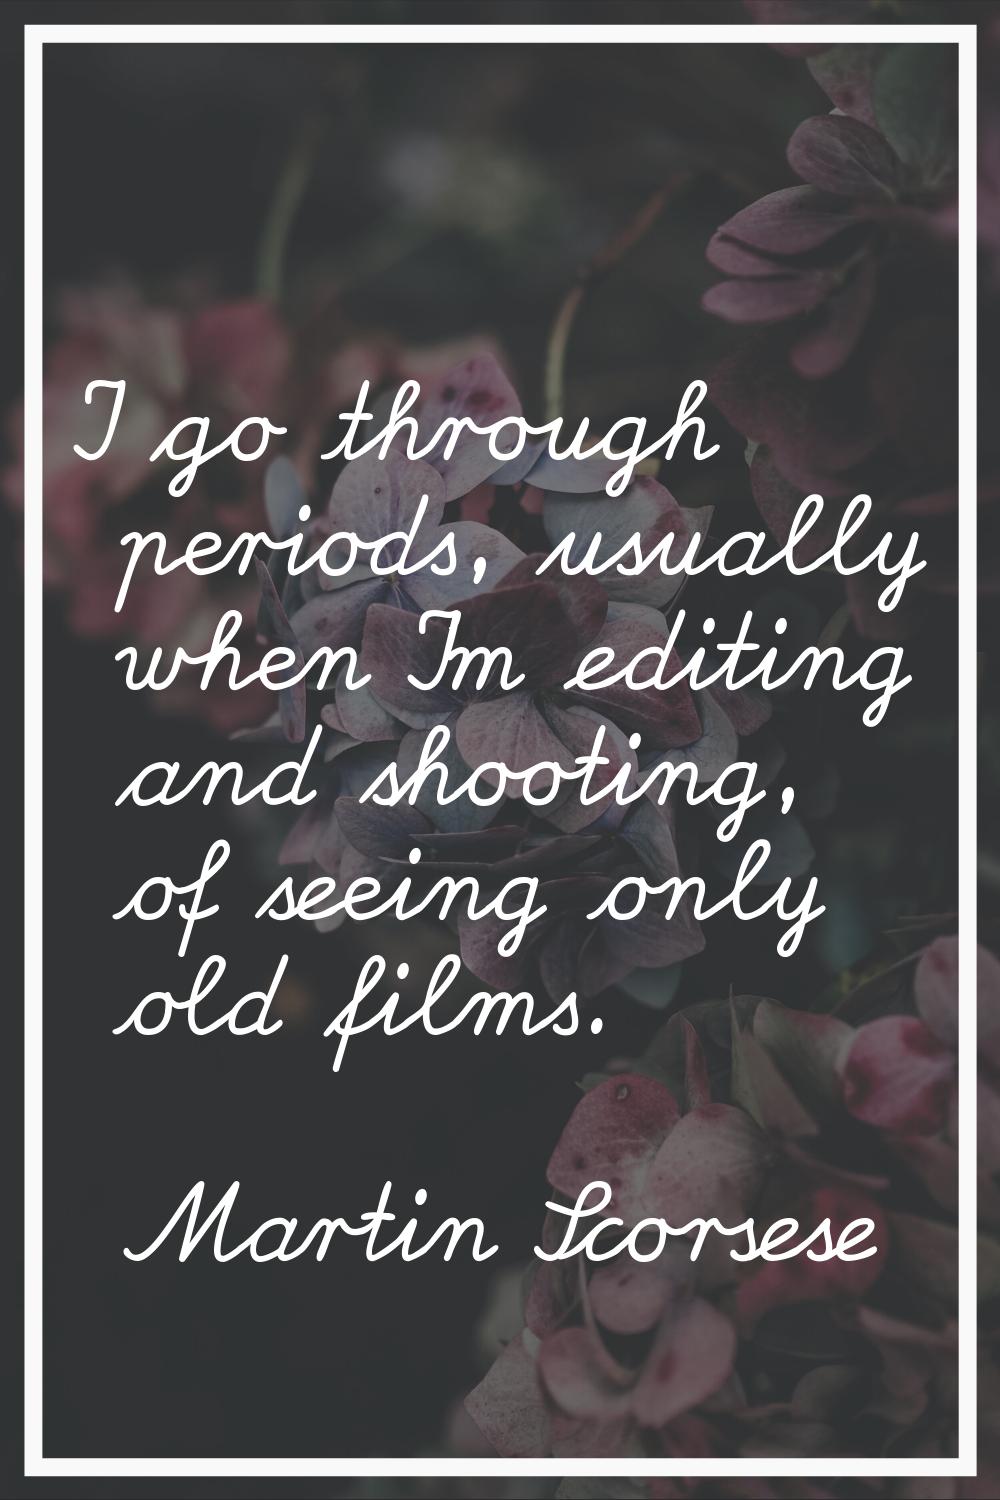 I go through periods, usually when I'm editing and shooting, of seeing only old films.